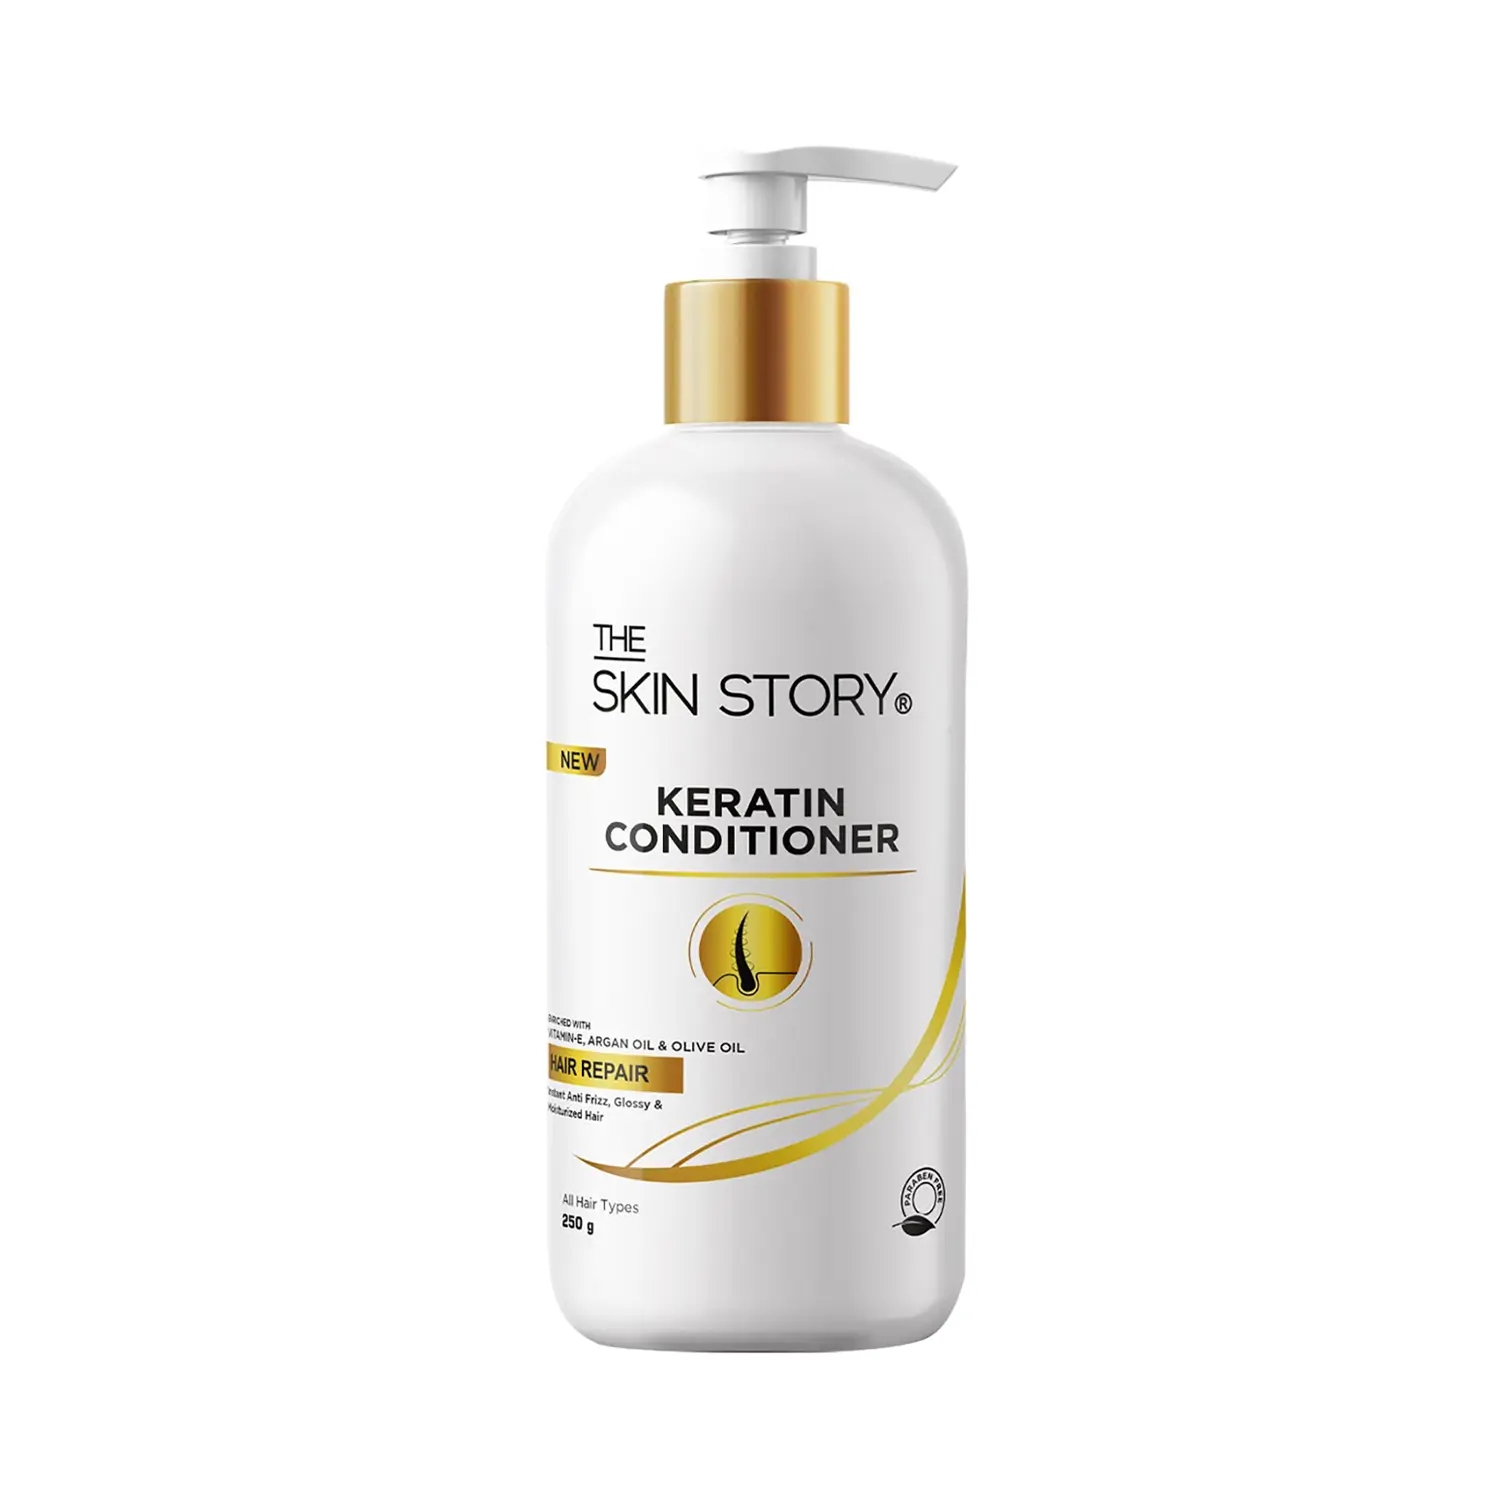 The Skin Story | The Skin Story New Keratin Repair & Strengthen Conditioner (250g)